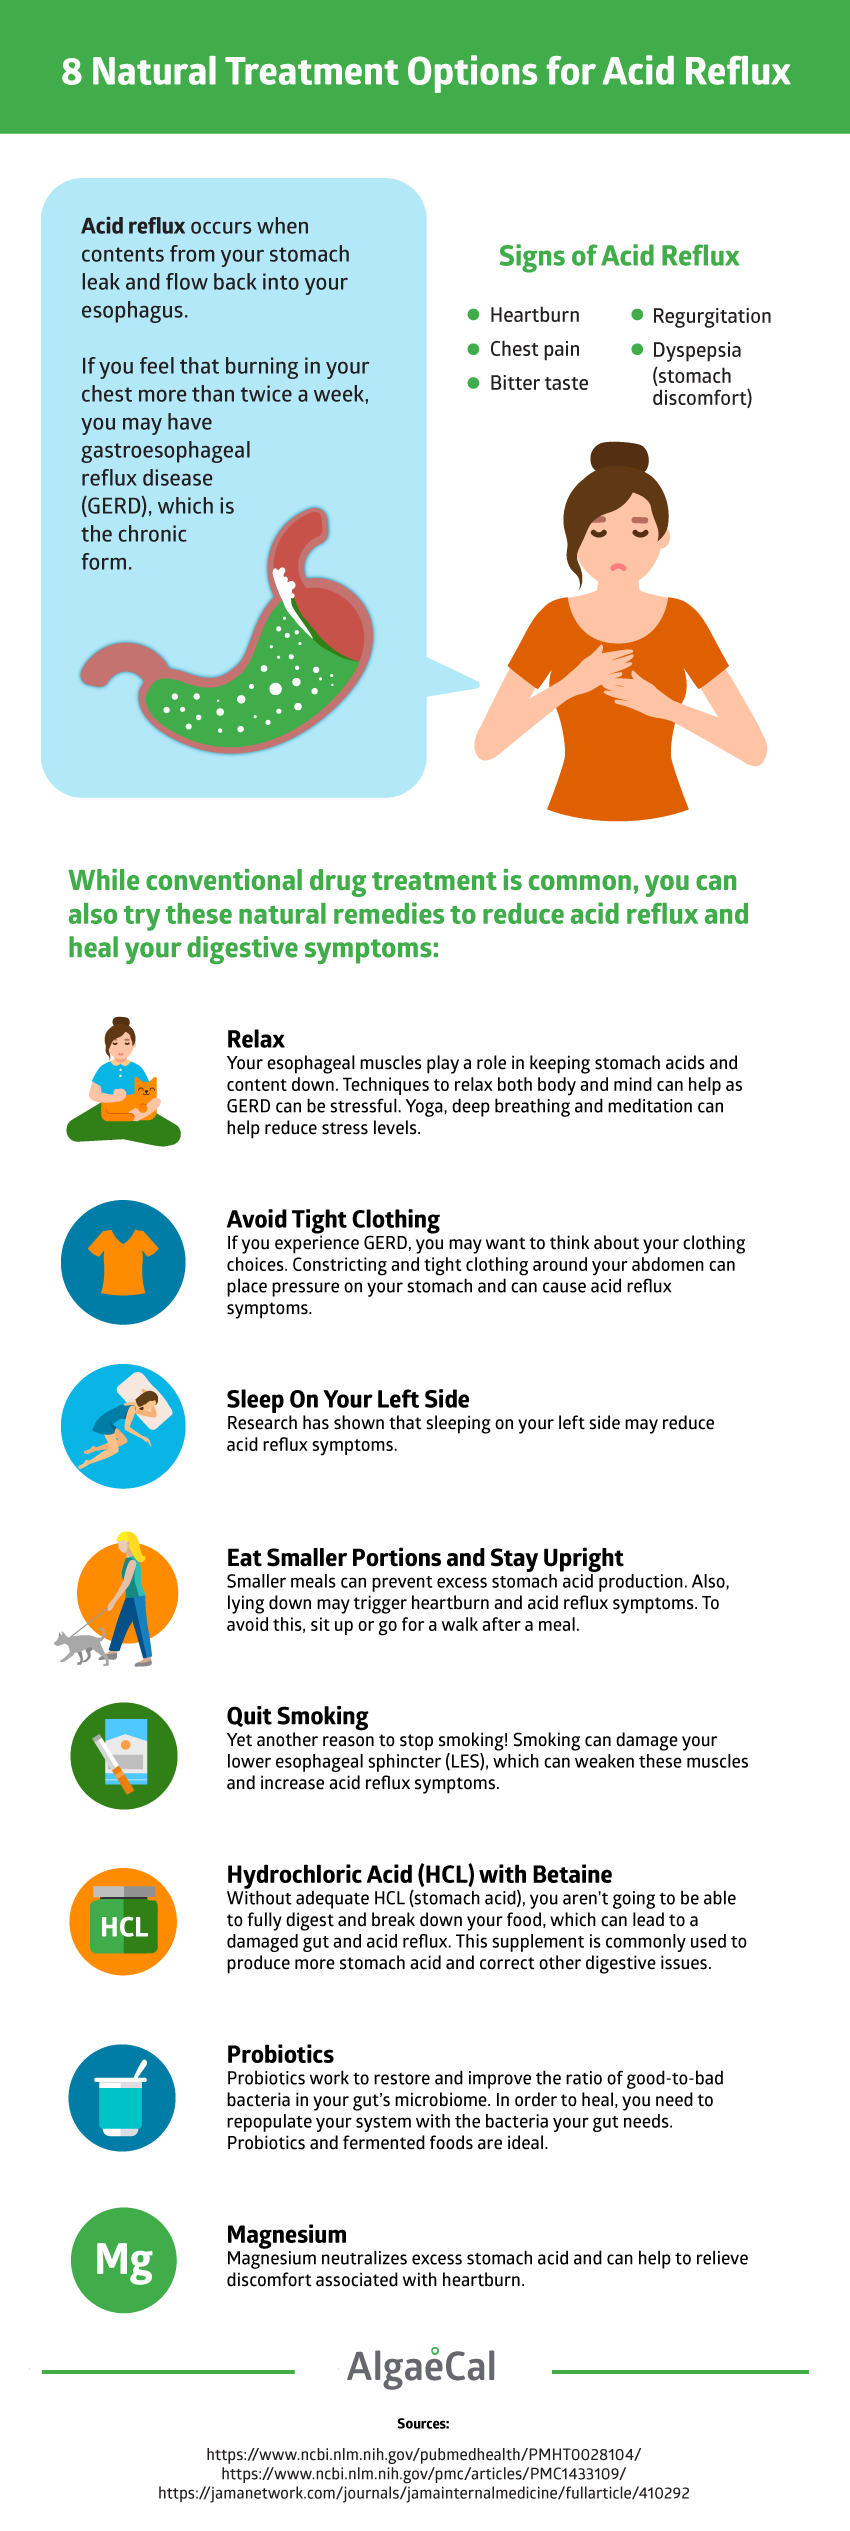 8 Natural Acid Reflux Treatment Options Infographic